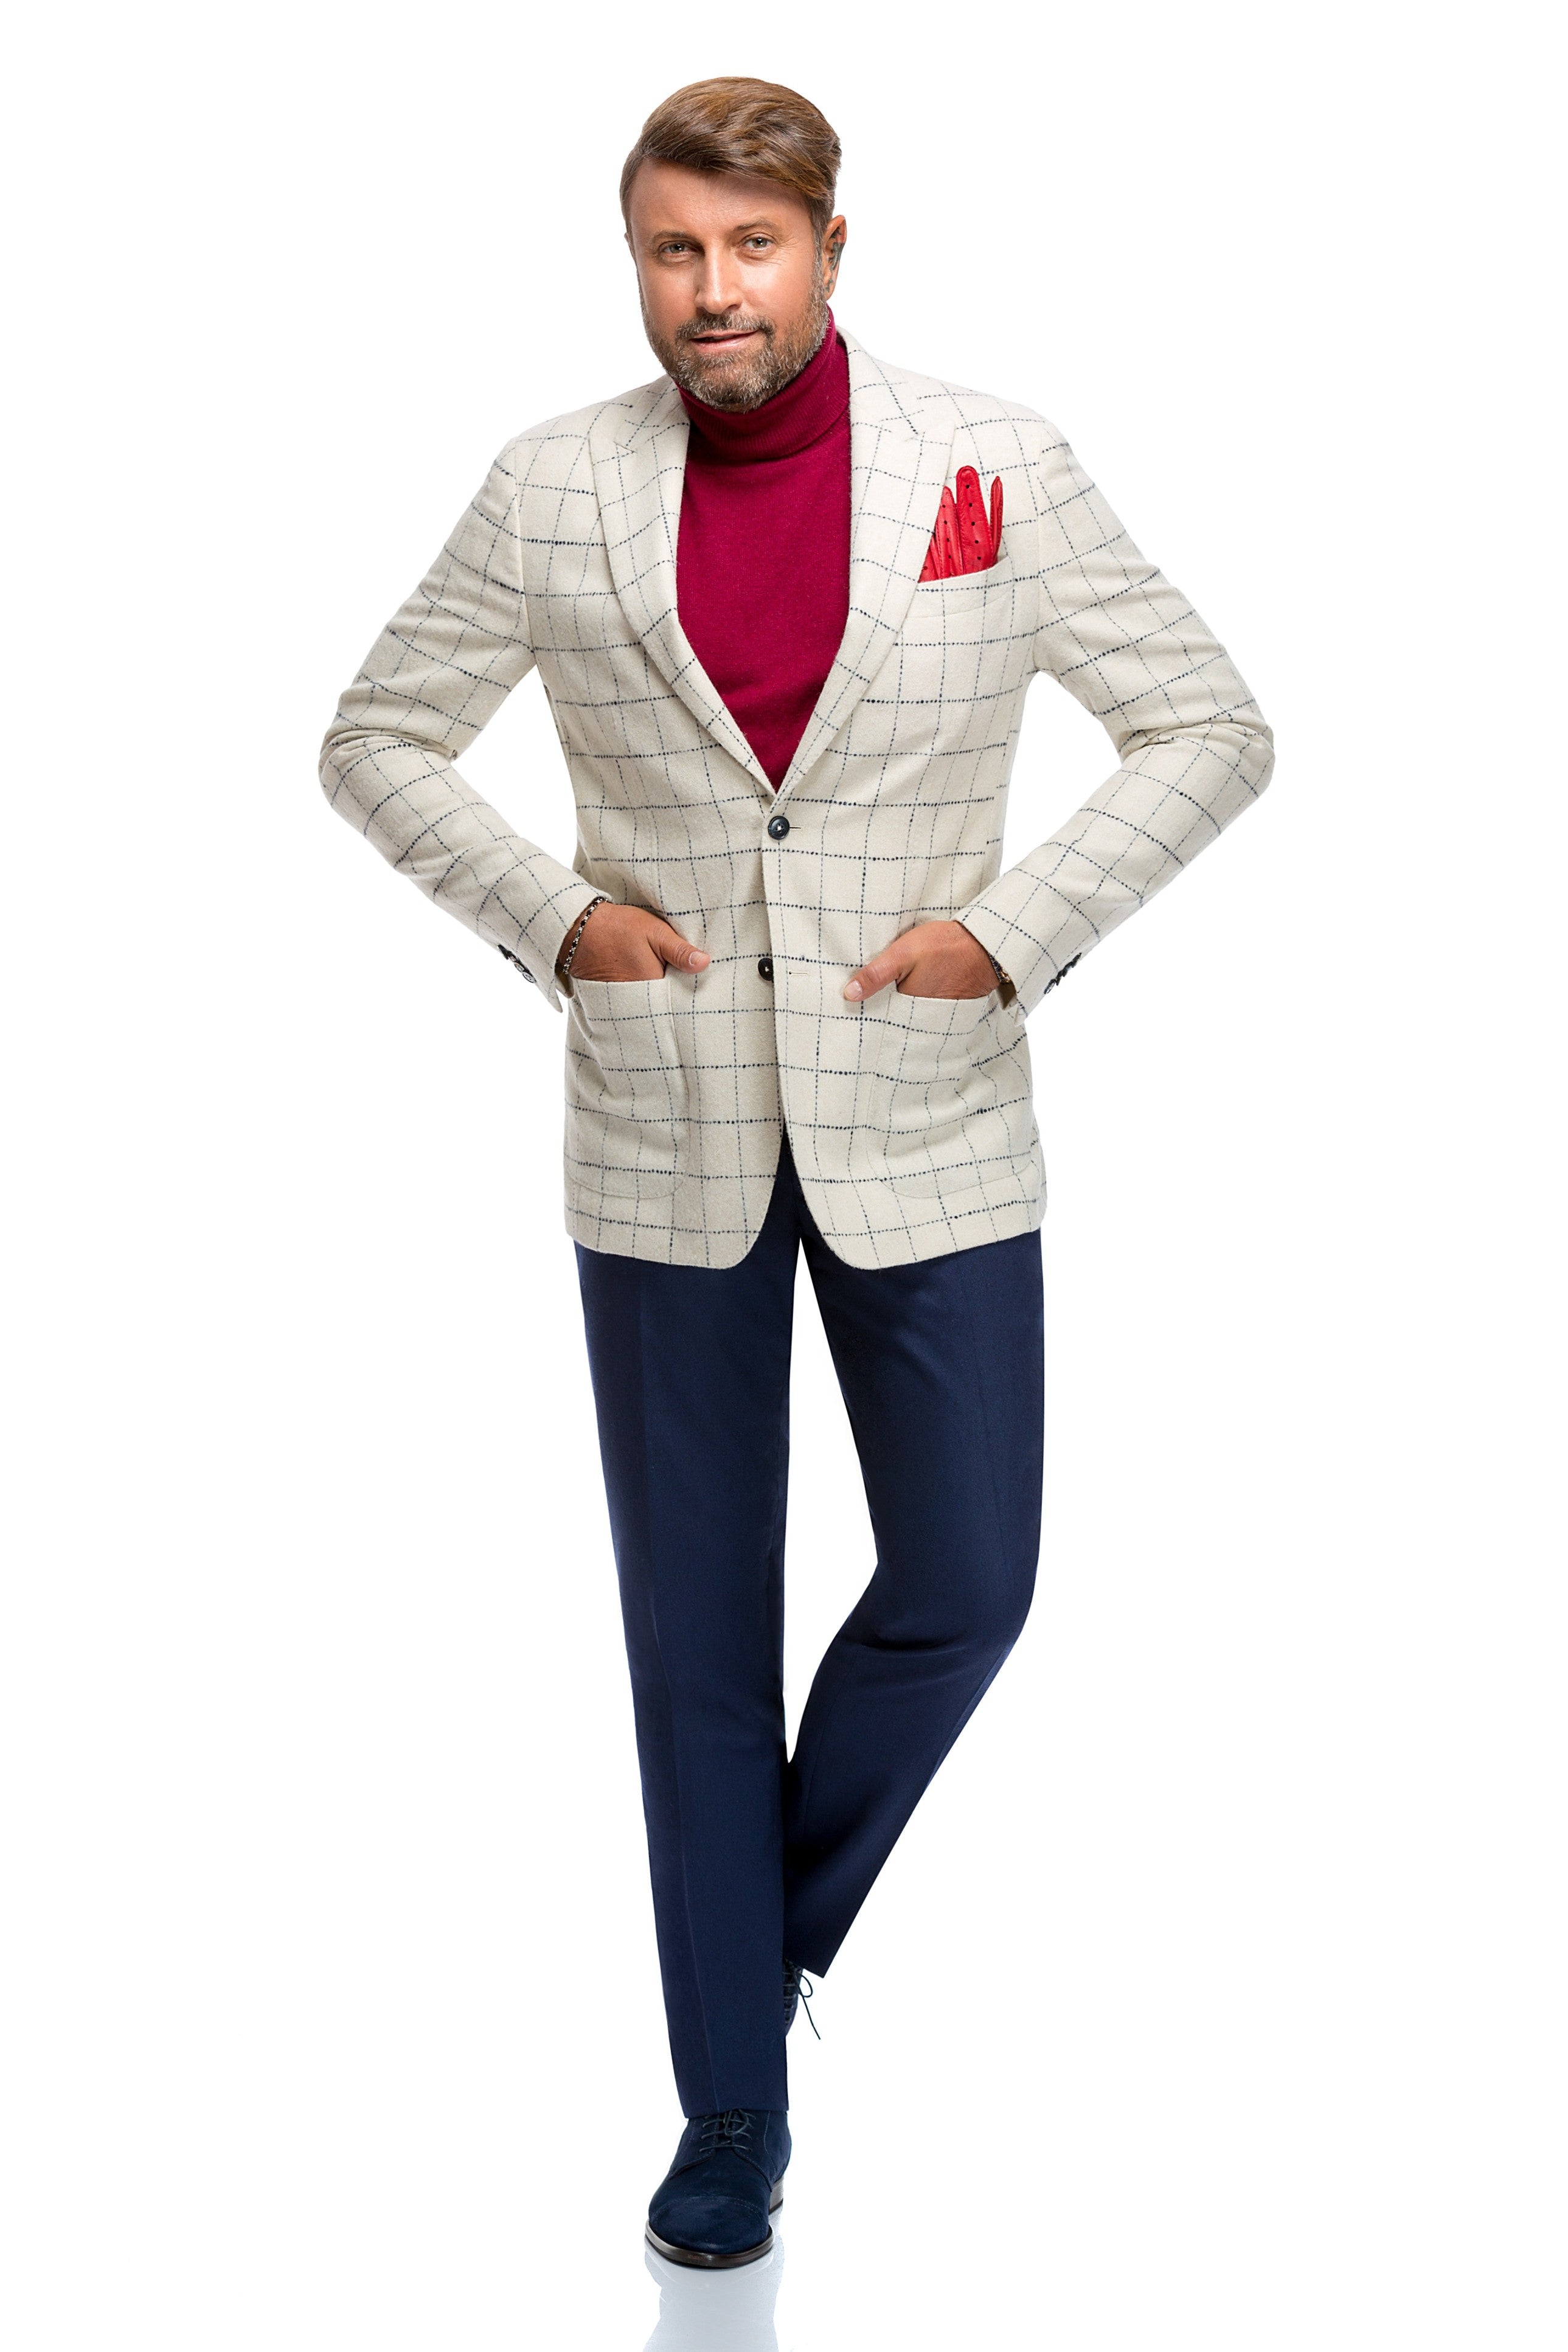 White jacket with blue checks, slim fit